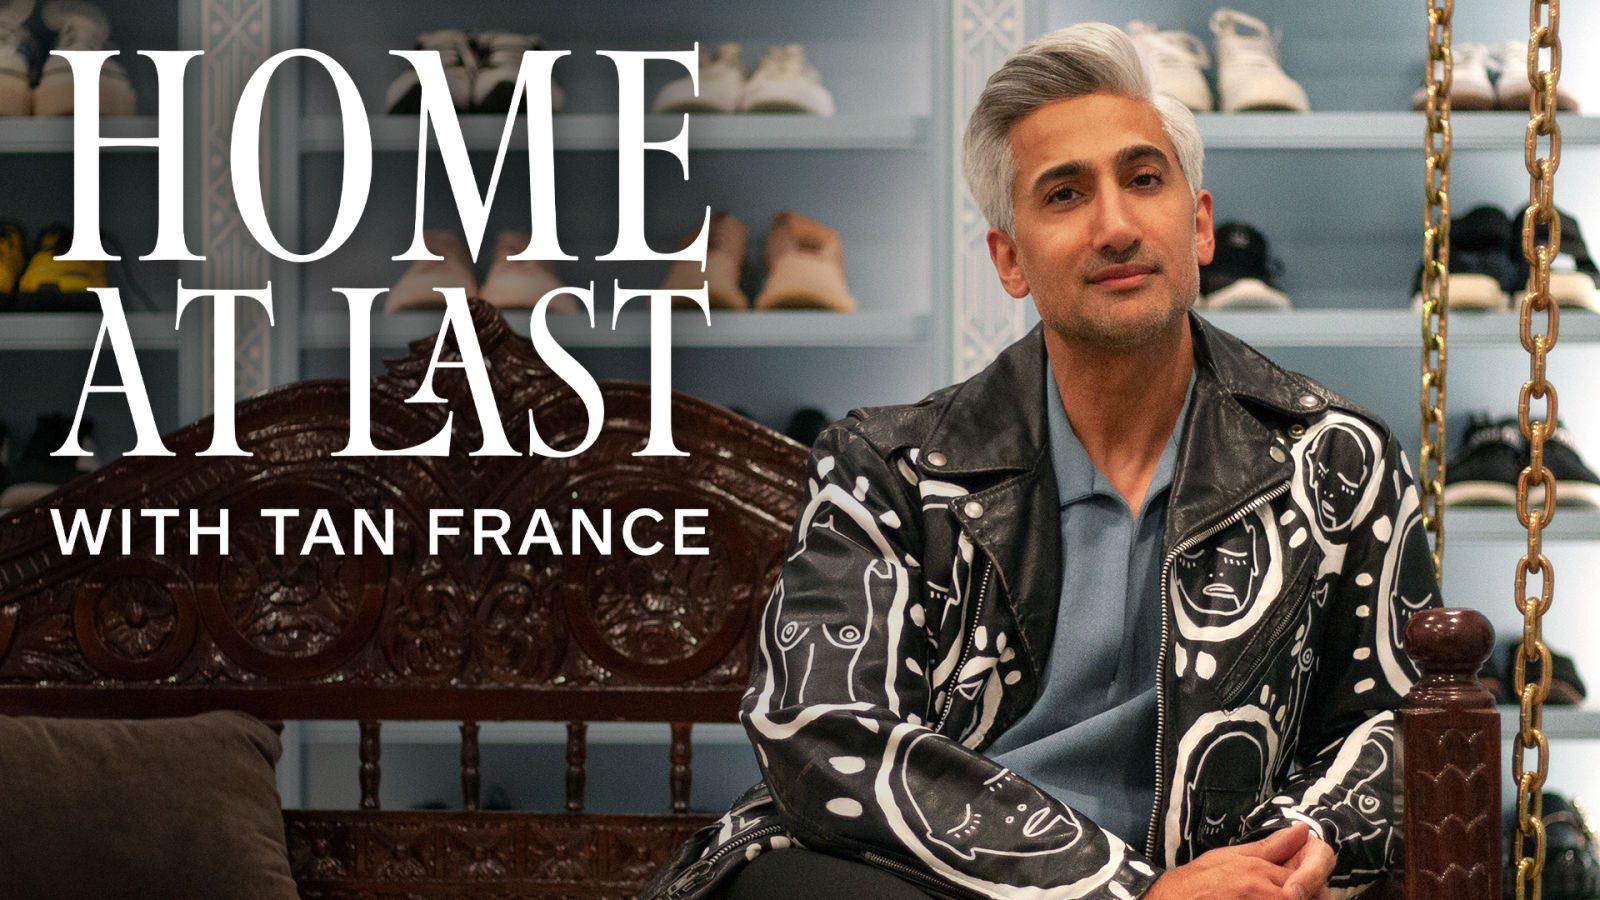 Home at Last With Tan France: Dream Closet